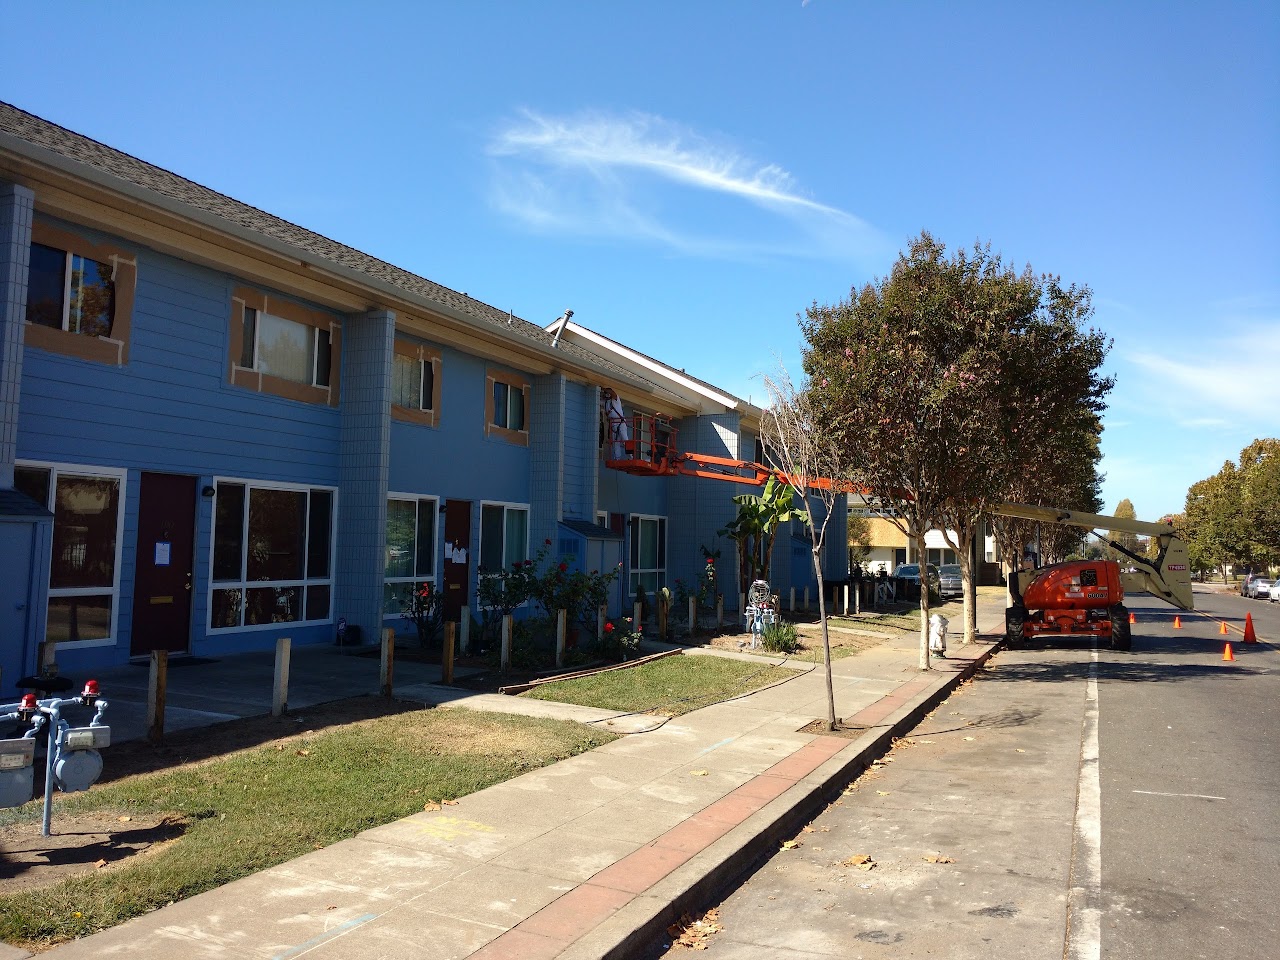 Photo of MORH I HOUSING. Affordable housing located at 953 8TH STREET OAKLAND, CA 94607